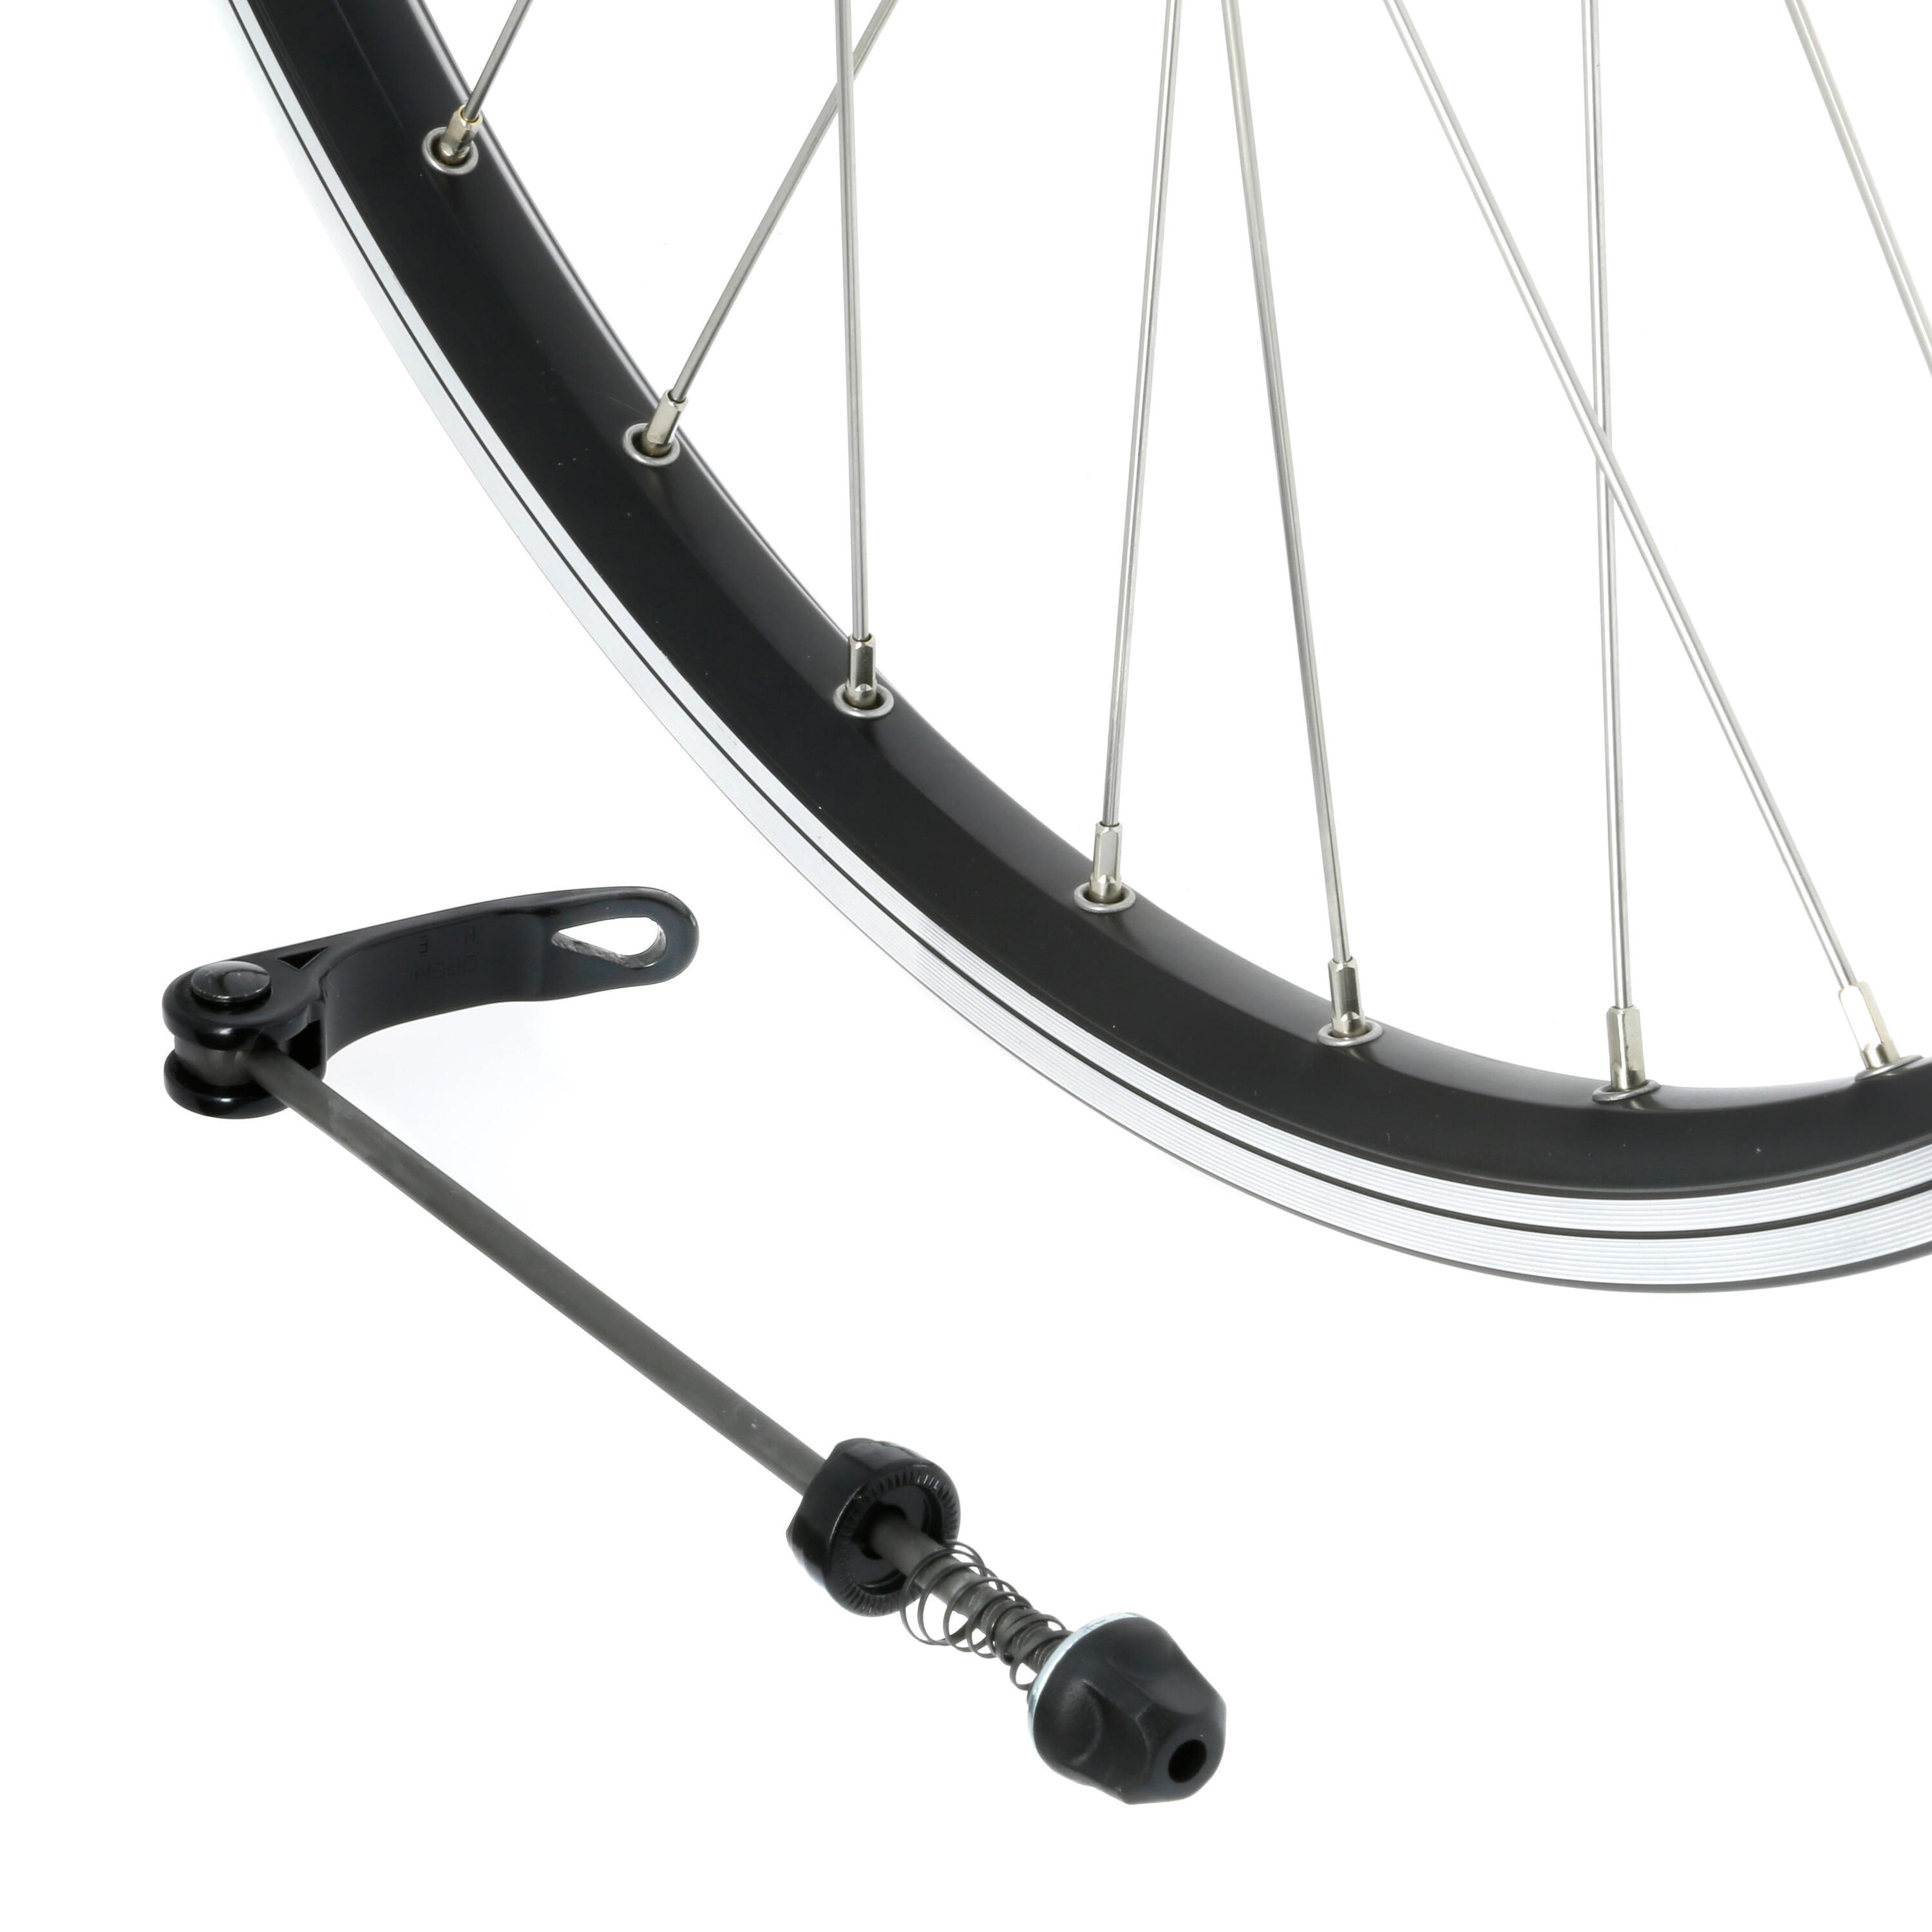 26" Mountain Bike Double-Walled Rear Wheel Disc/V-Brake with Quick Release 3/14